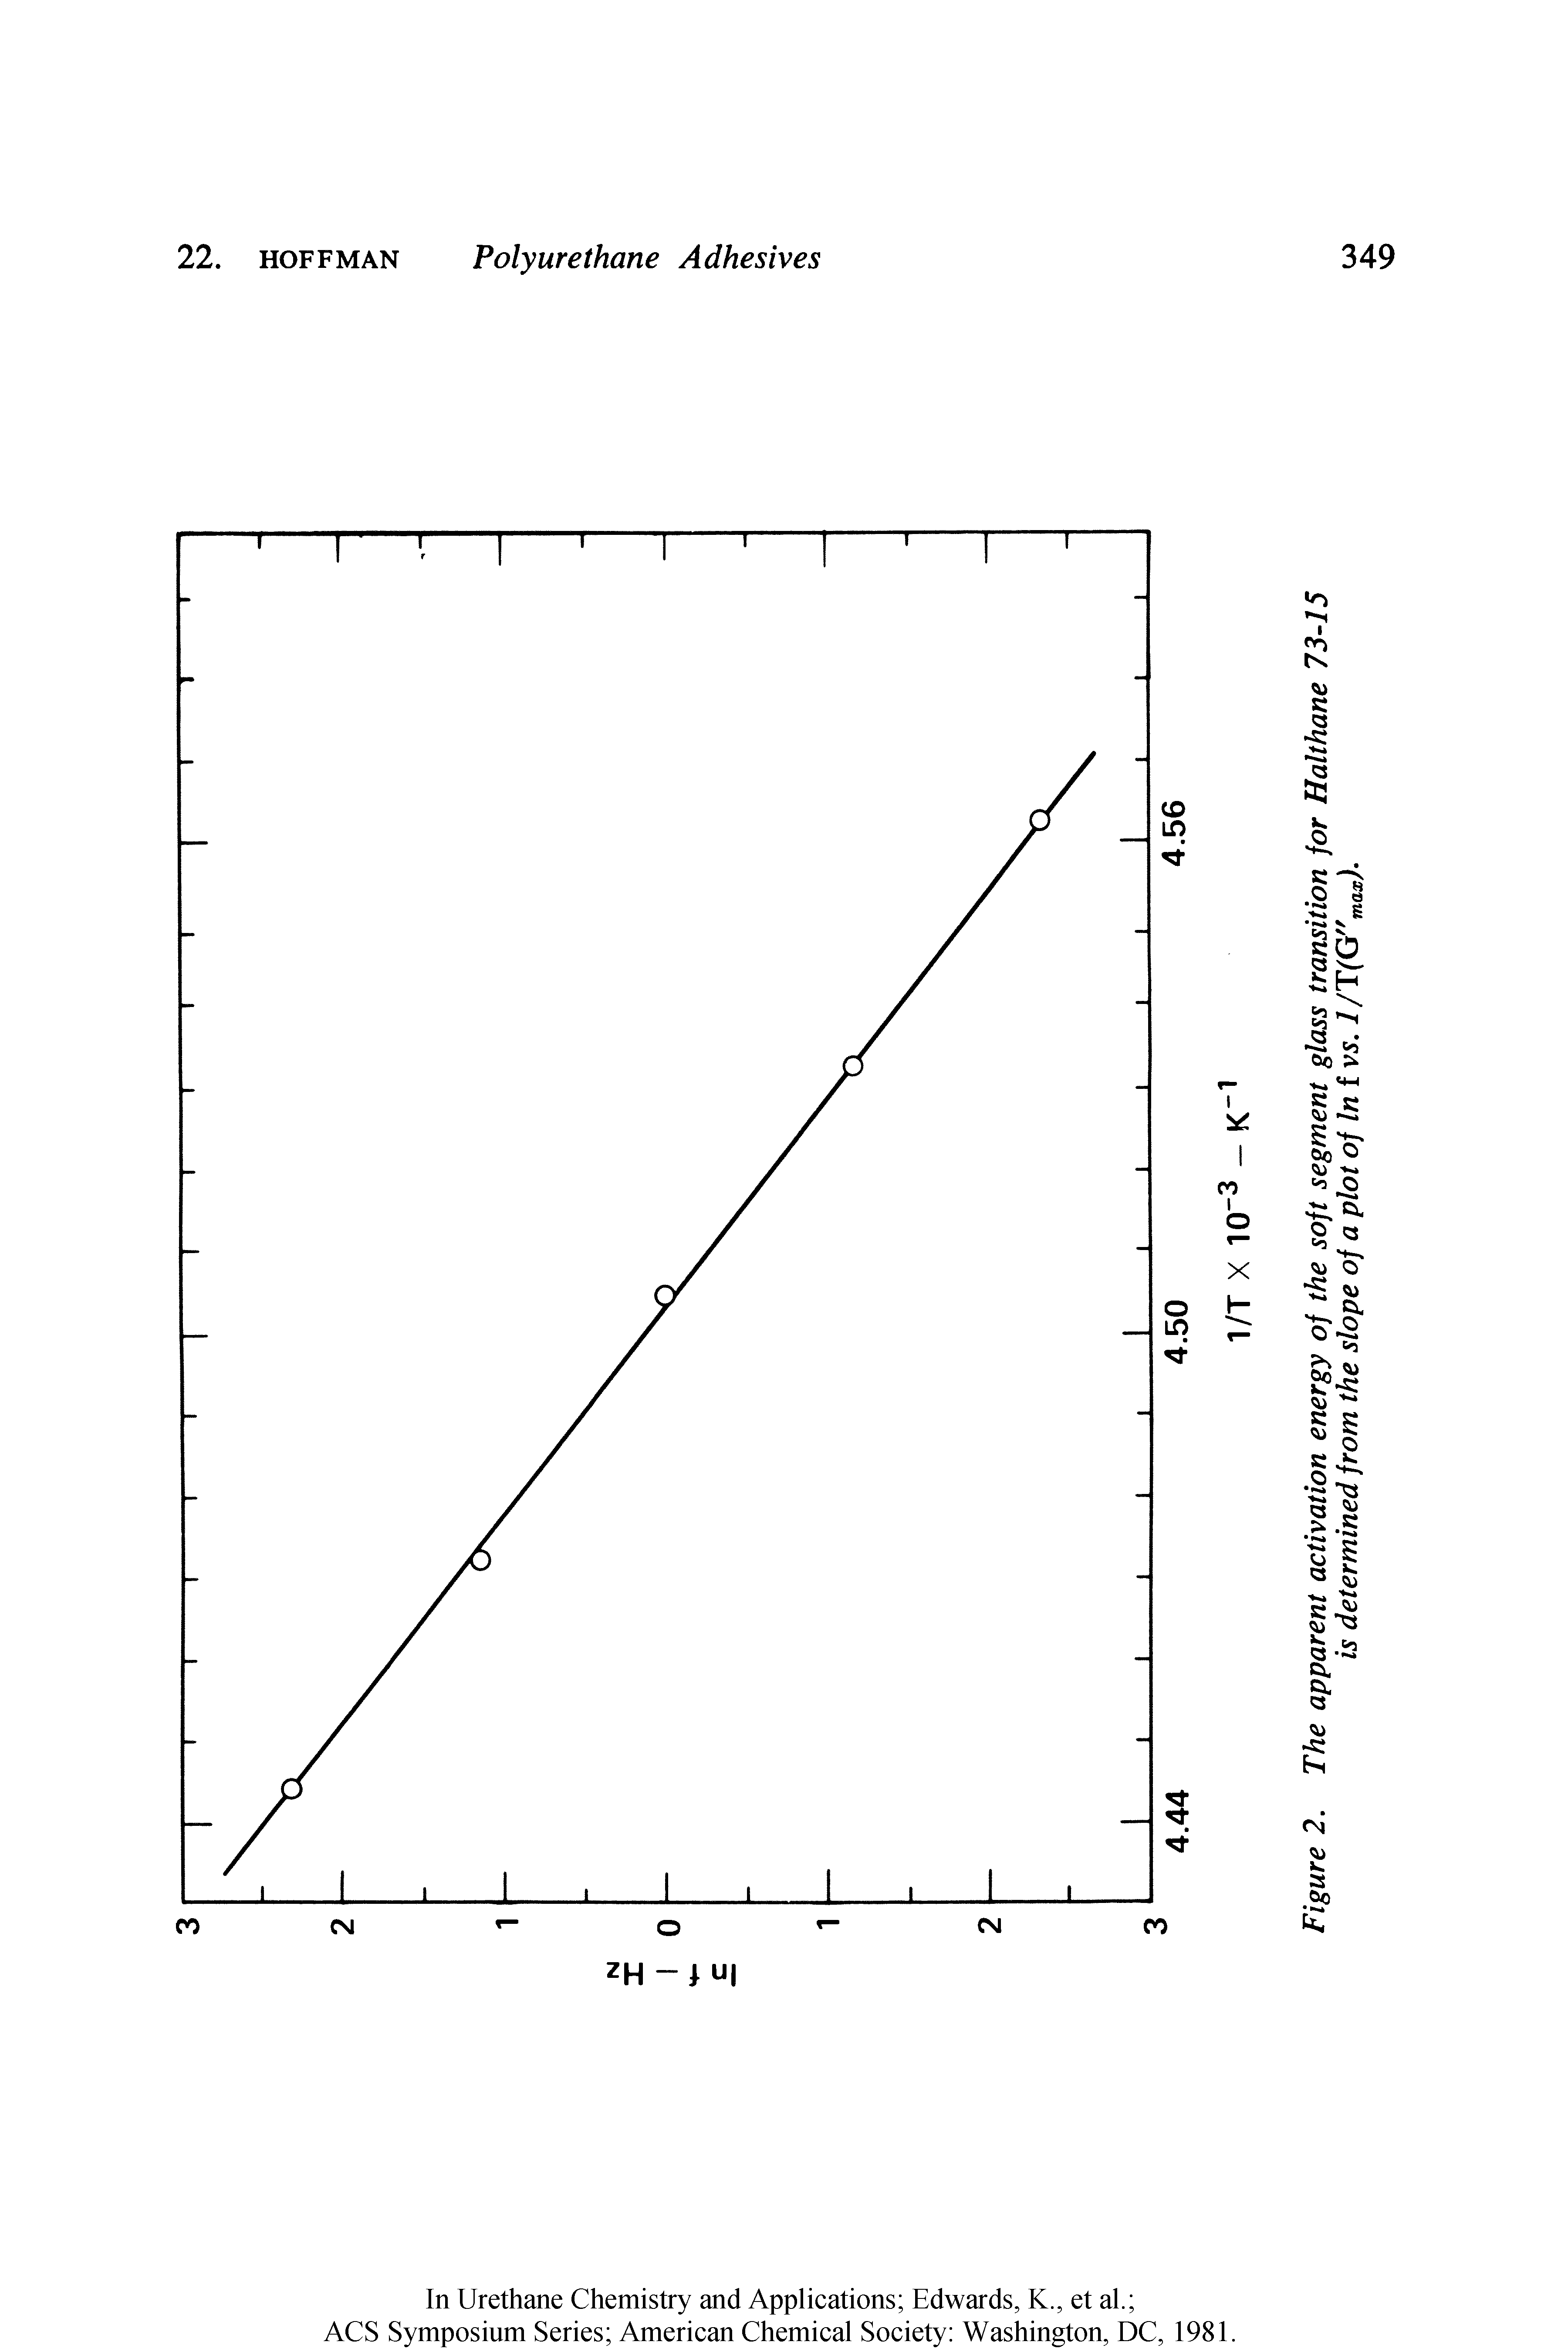 Figure 2. The apparent activation energy of the soft segment glass transition for Halthane 73-15 is determined from the slope of a plot of In f vs. 1 /T(G"max).